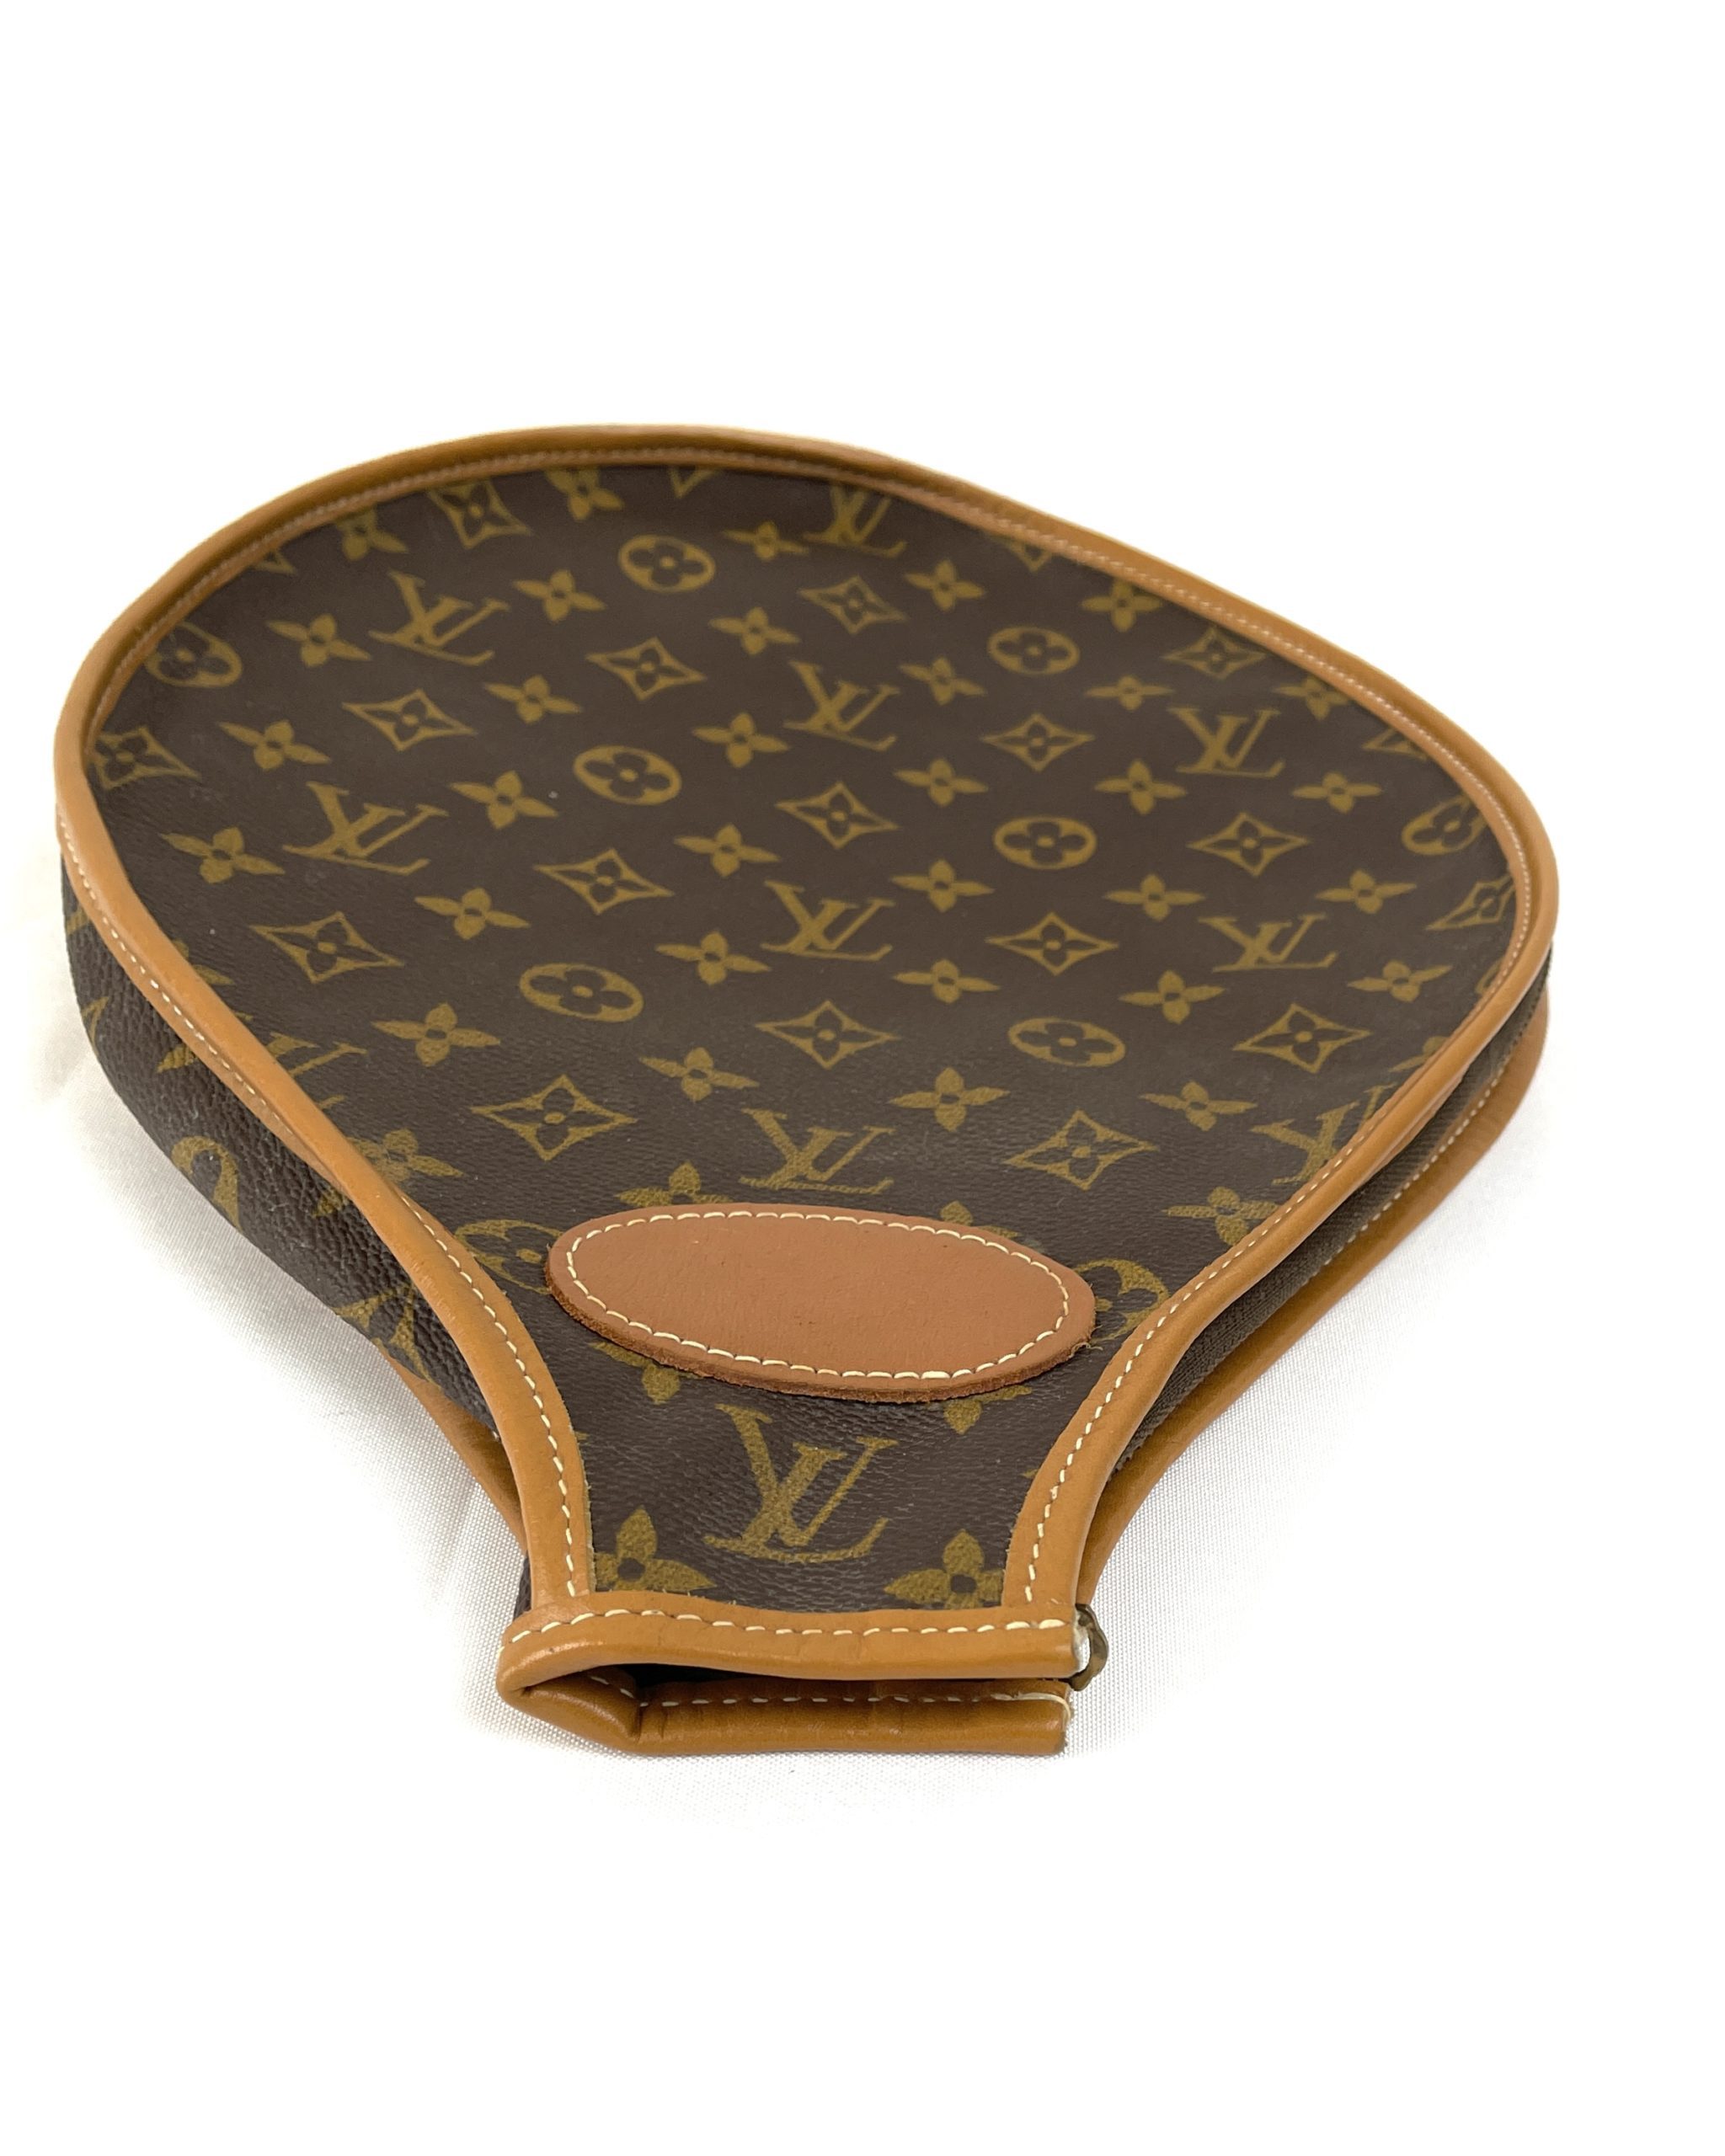 Vintage Louis Vuitton French Company Tennis Racket Cover - A World